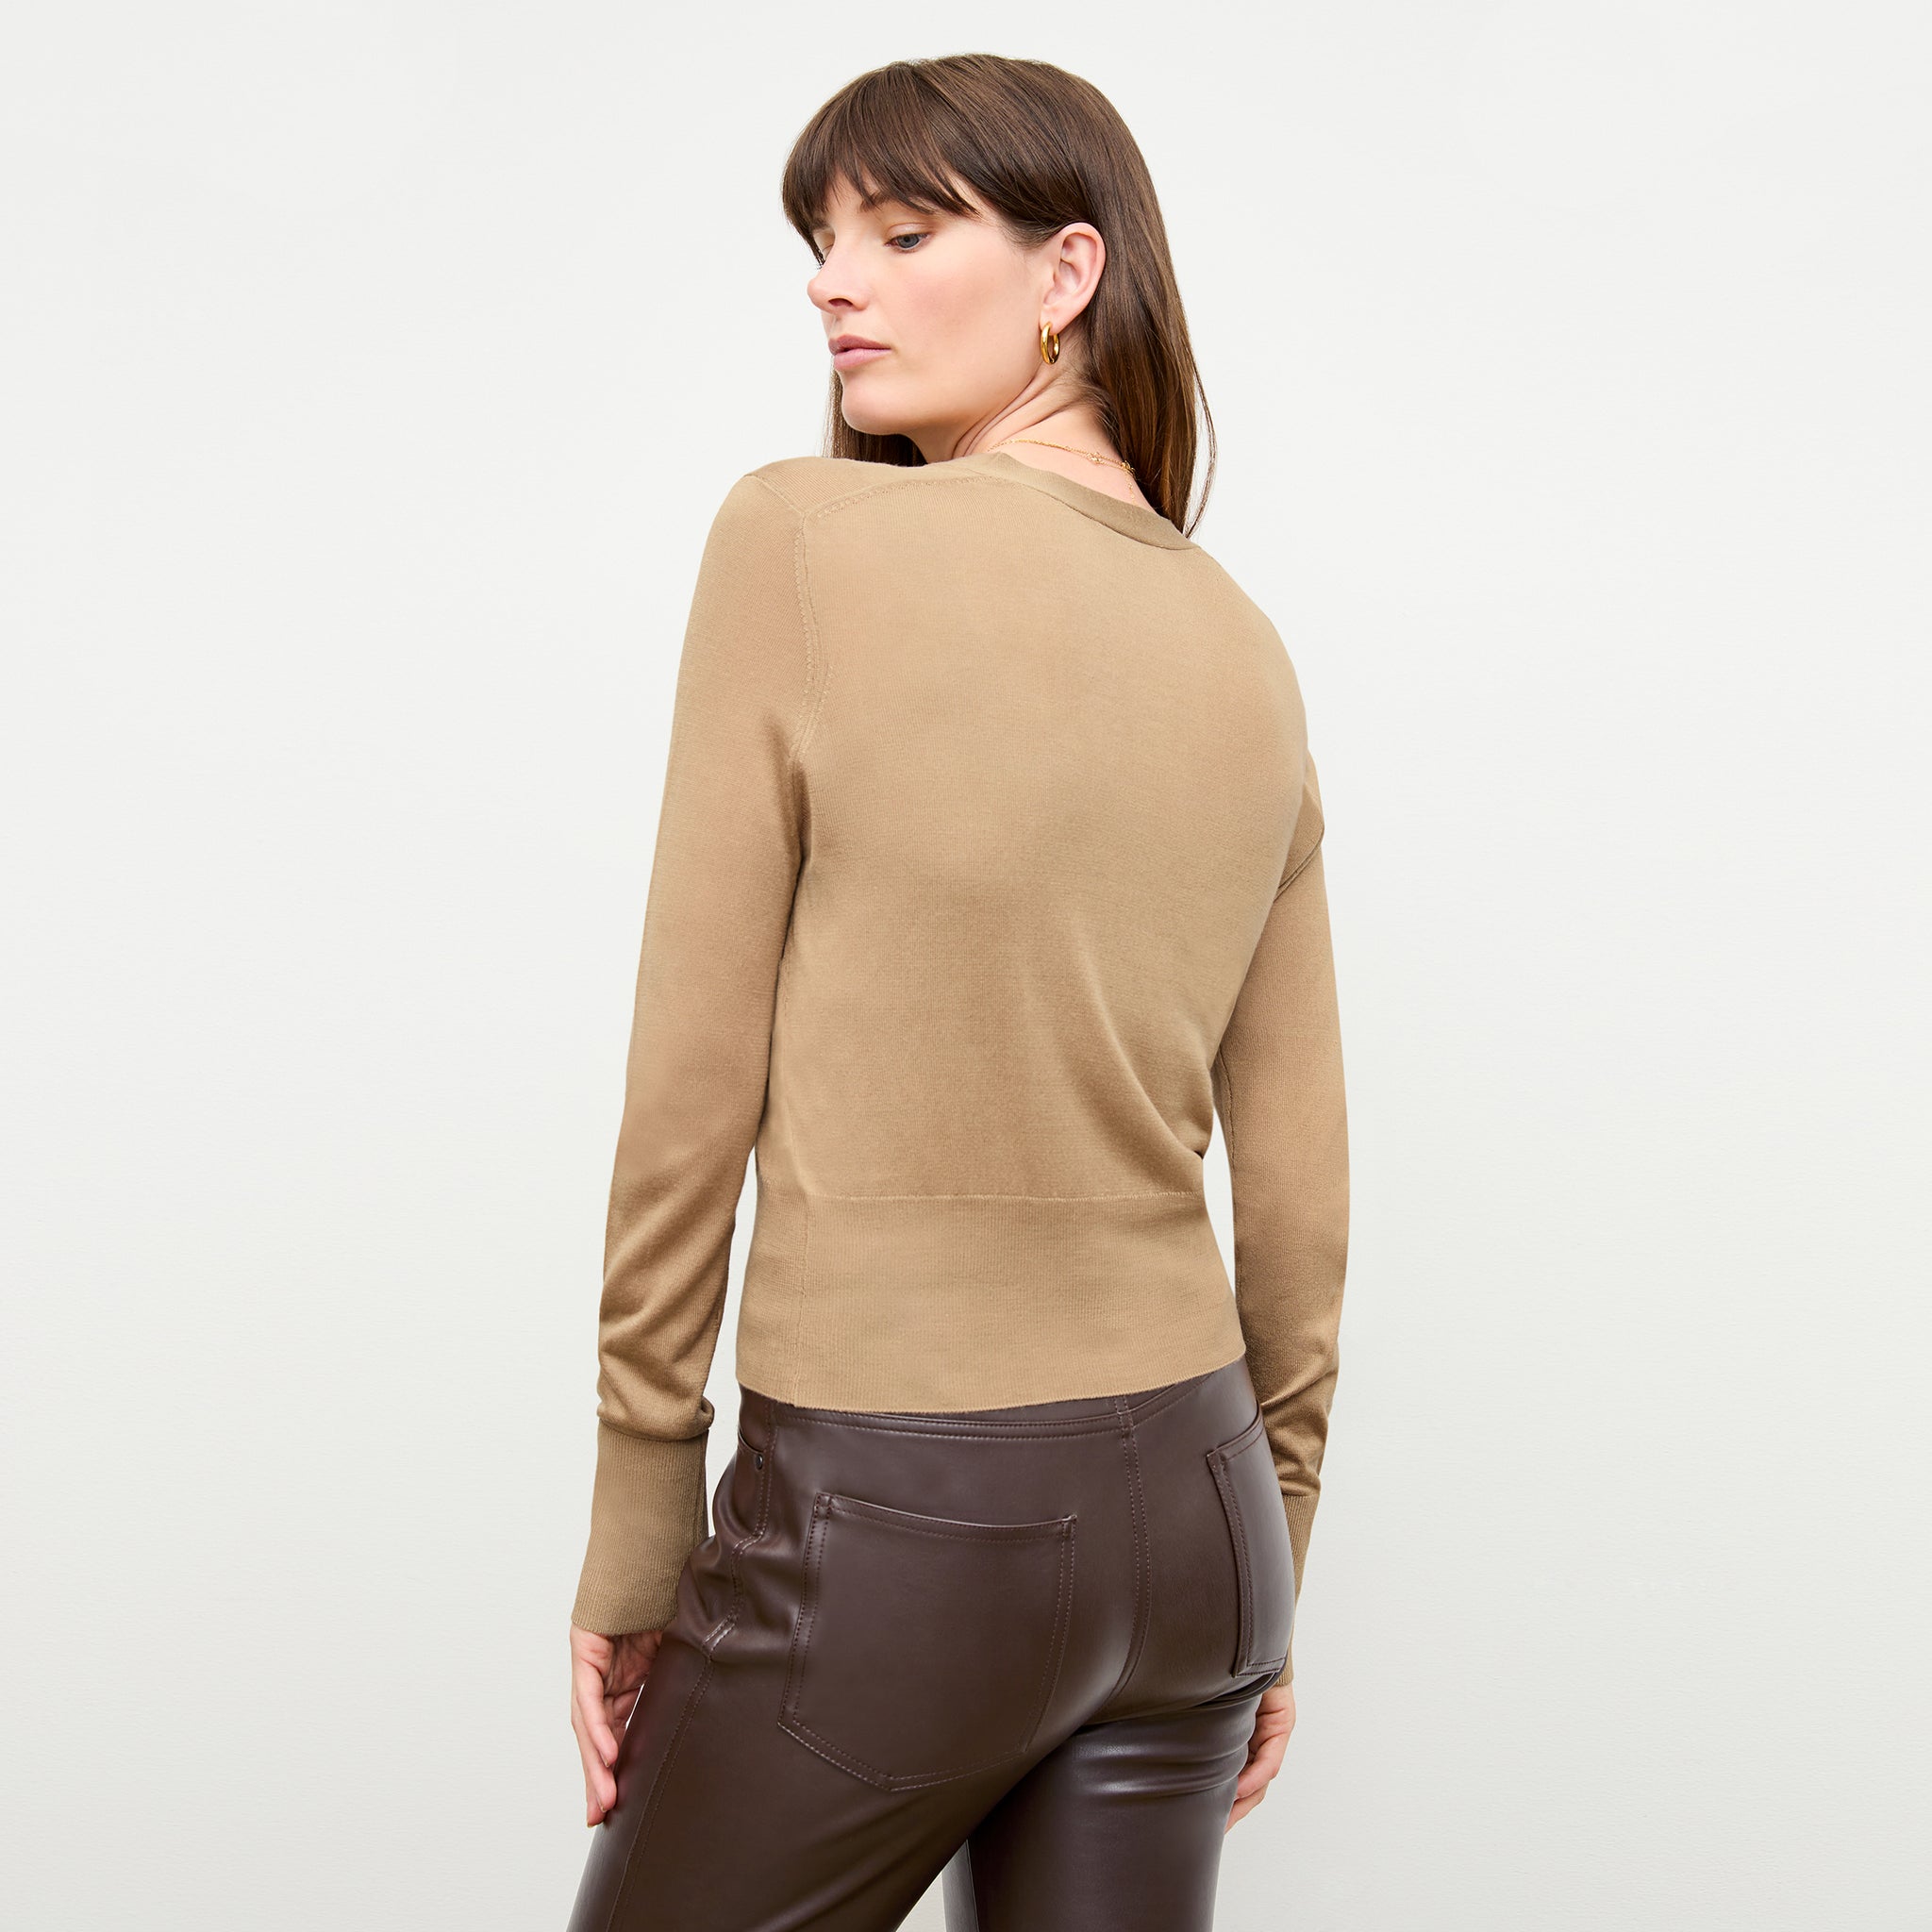 back image of a woman wearing the delphine top in camel